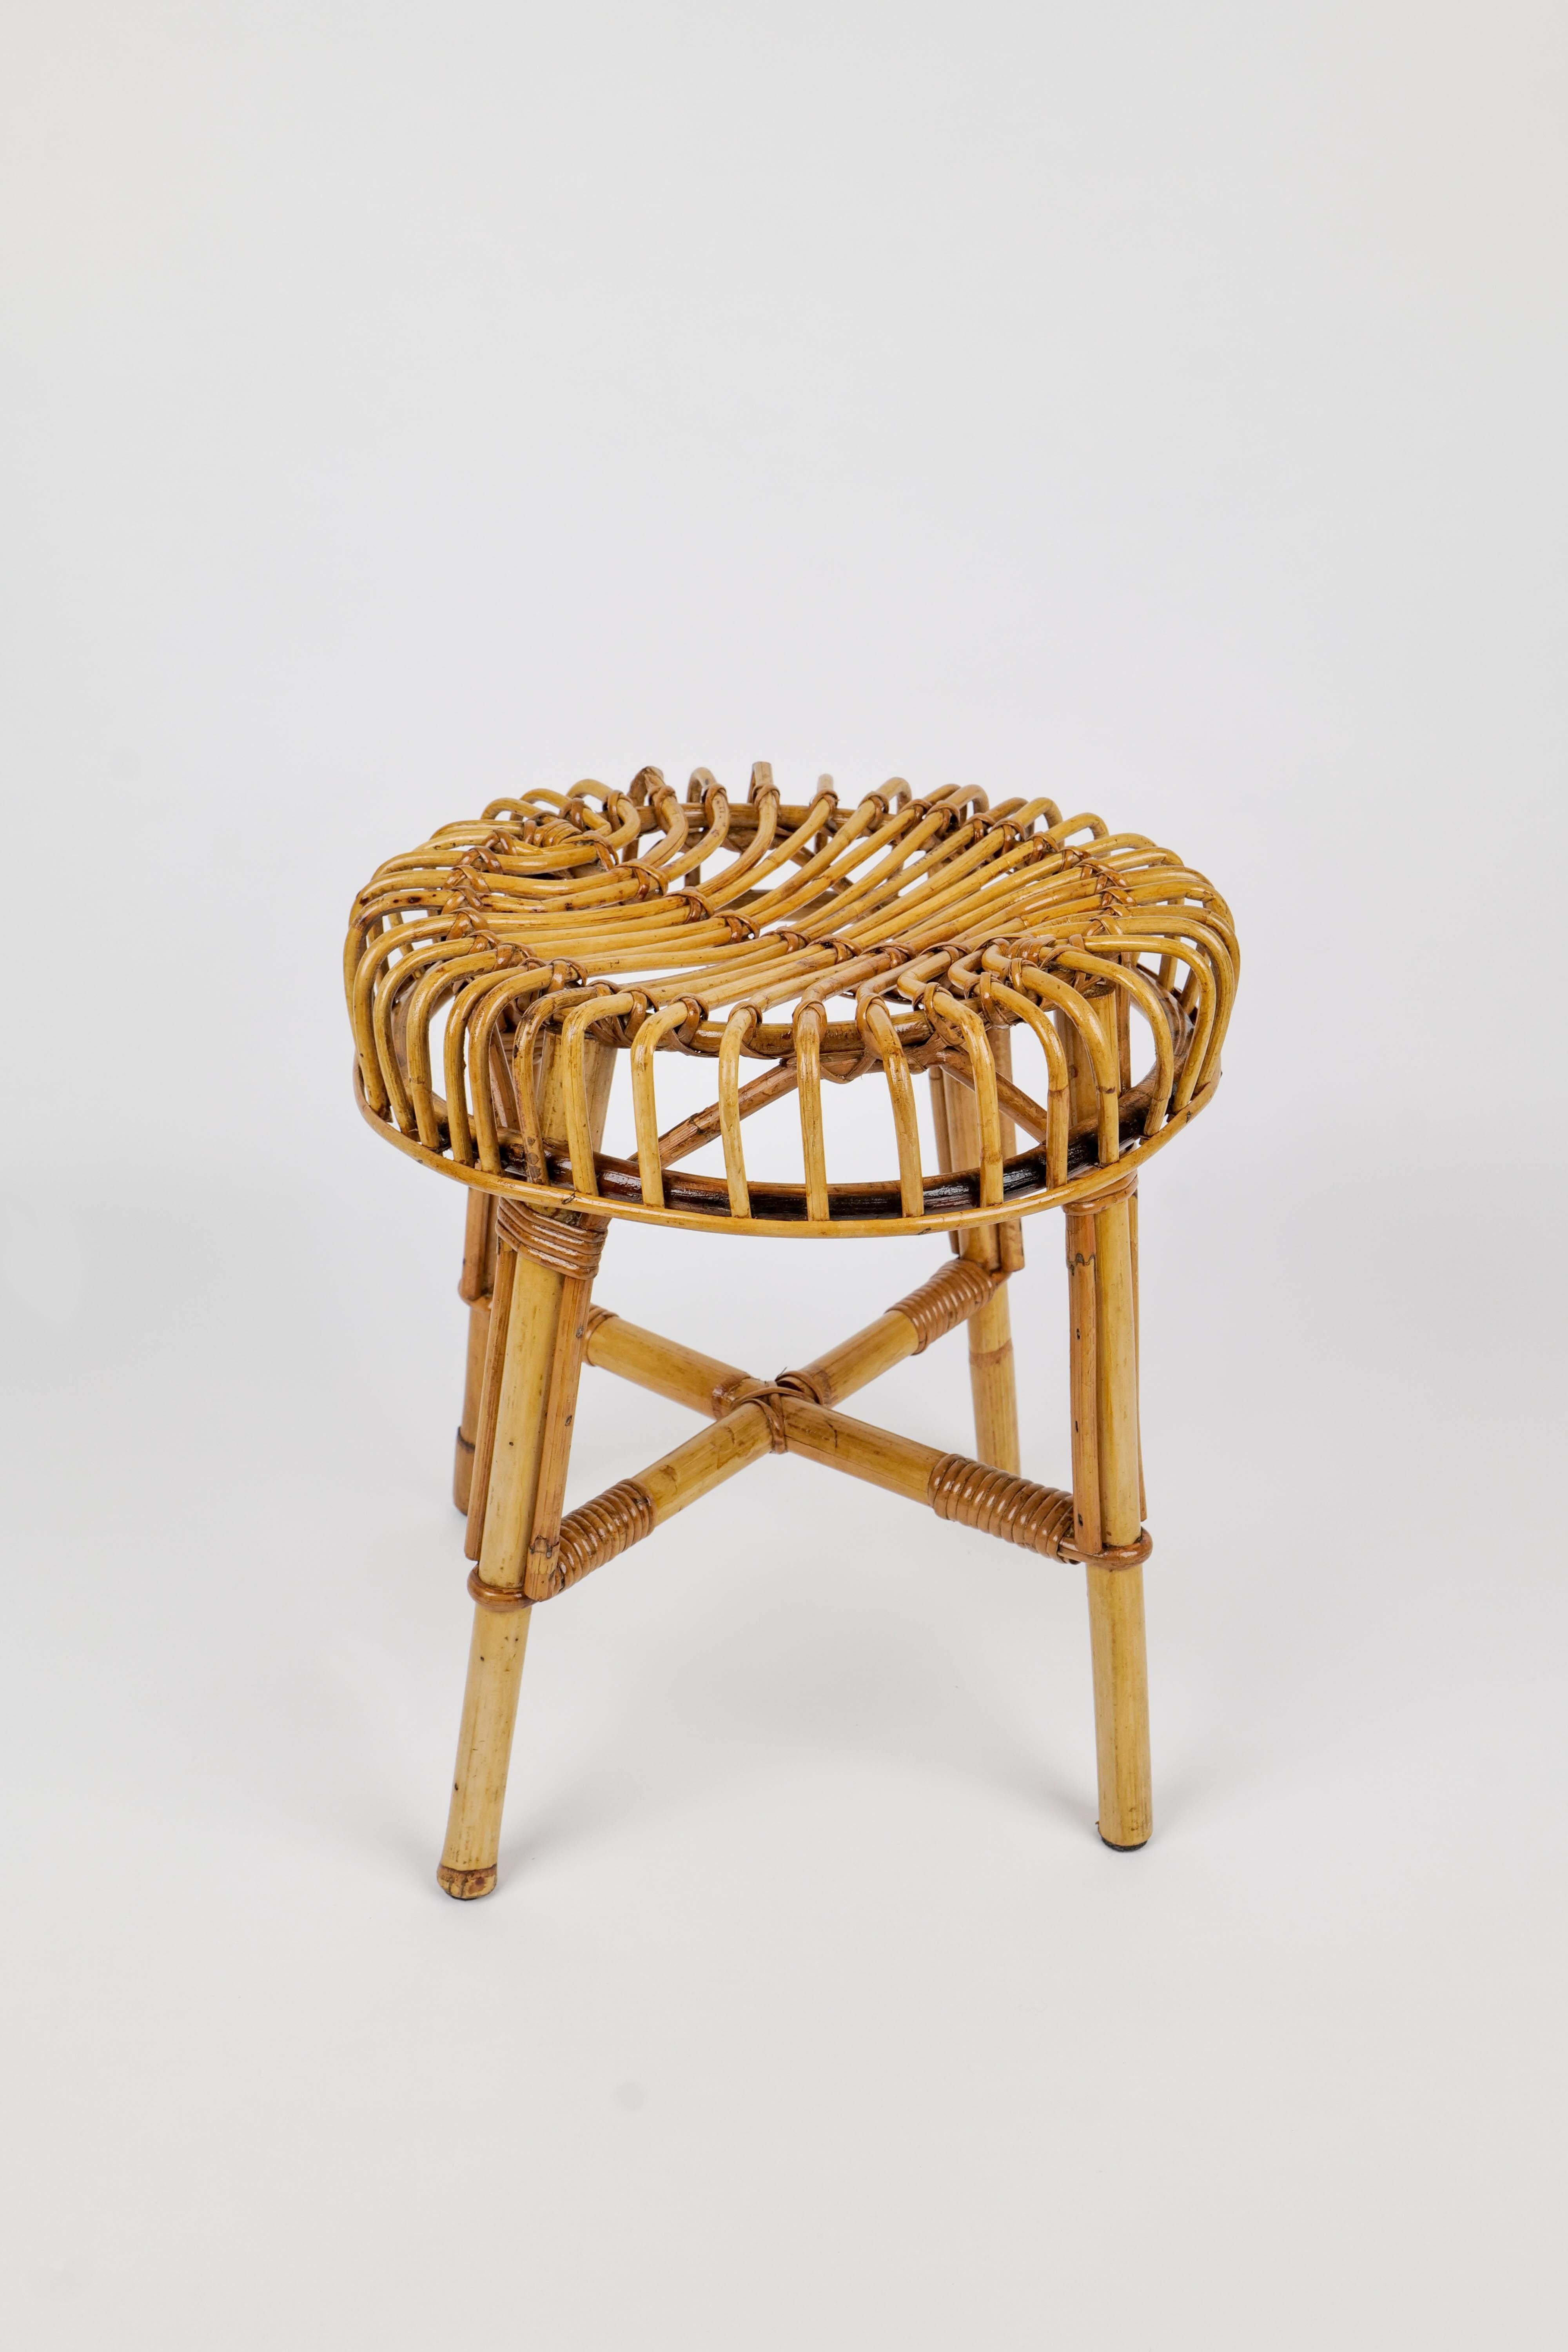 Elegant Italian Mid-Century Modern rattan and bamboo stool / benche / ottoman attributed Franco Albini. 

Made in Italy 1960s.